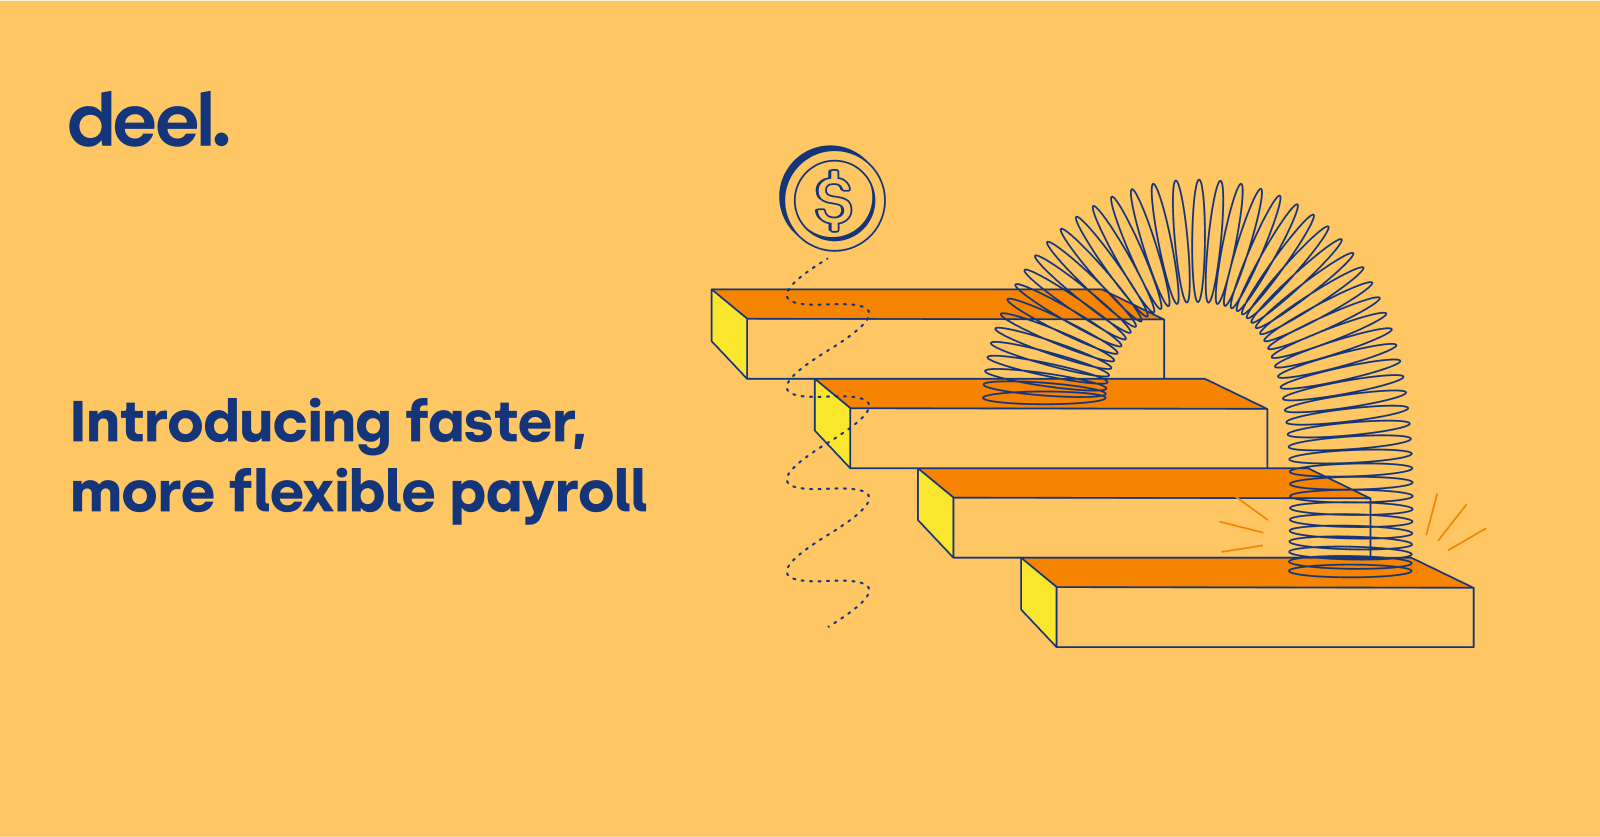 Introducing faster, more flexible payroll